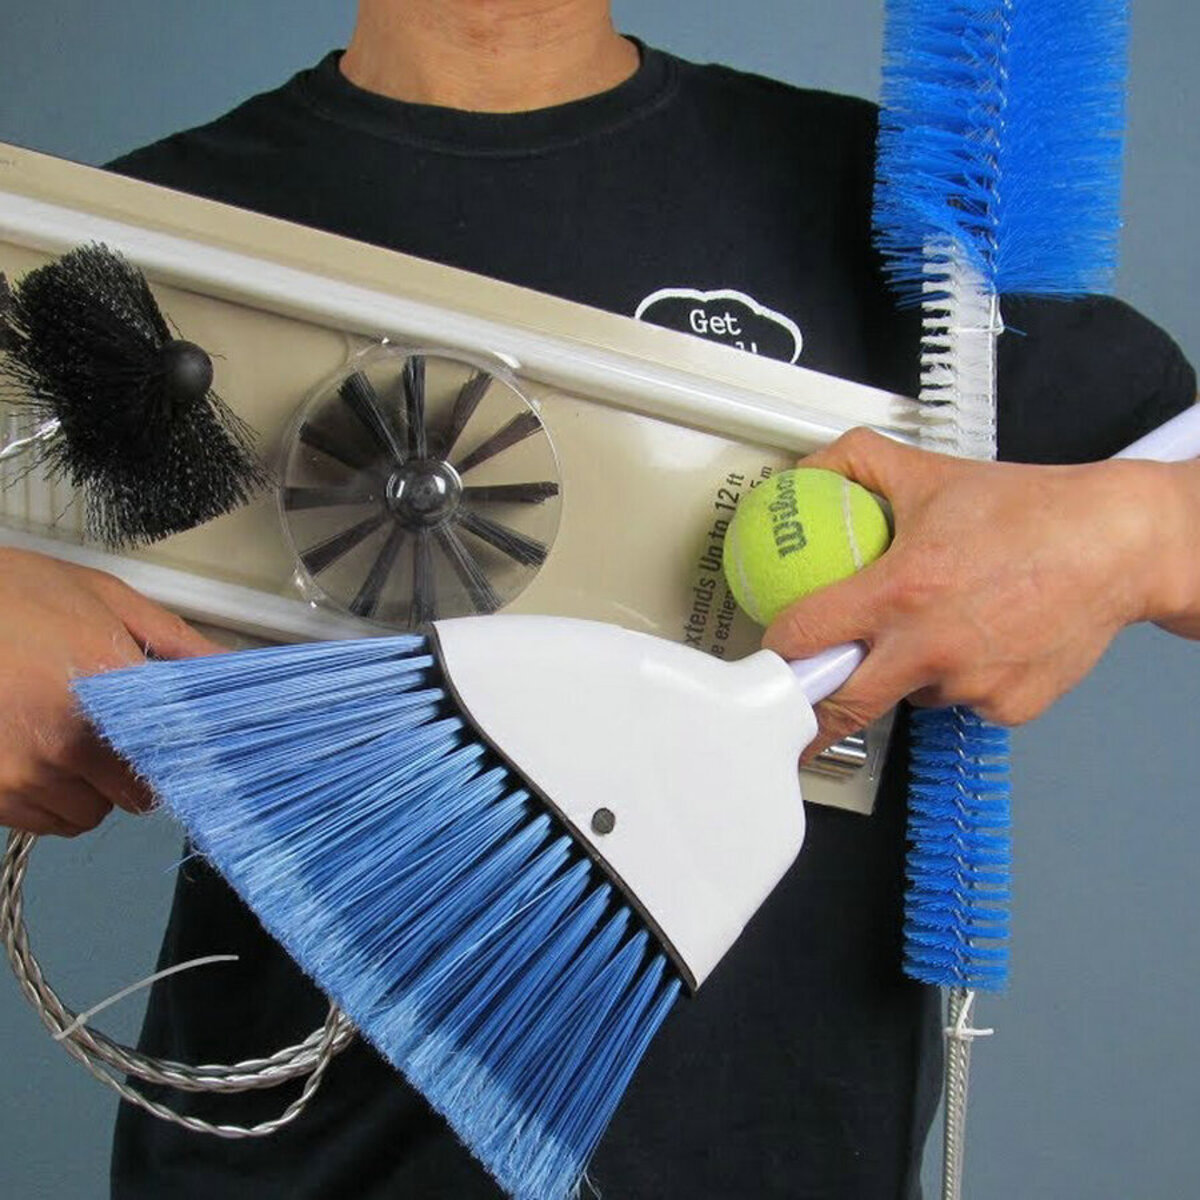 Dryer Vent Cleaner Kit -(20-Feet) Innovative Lint Remover Reusable Strong Nylon| Flexible Lint Brush with Drill Attachment for Faster Cleaning